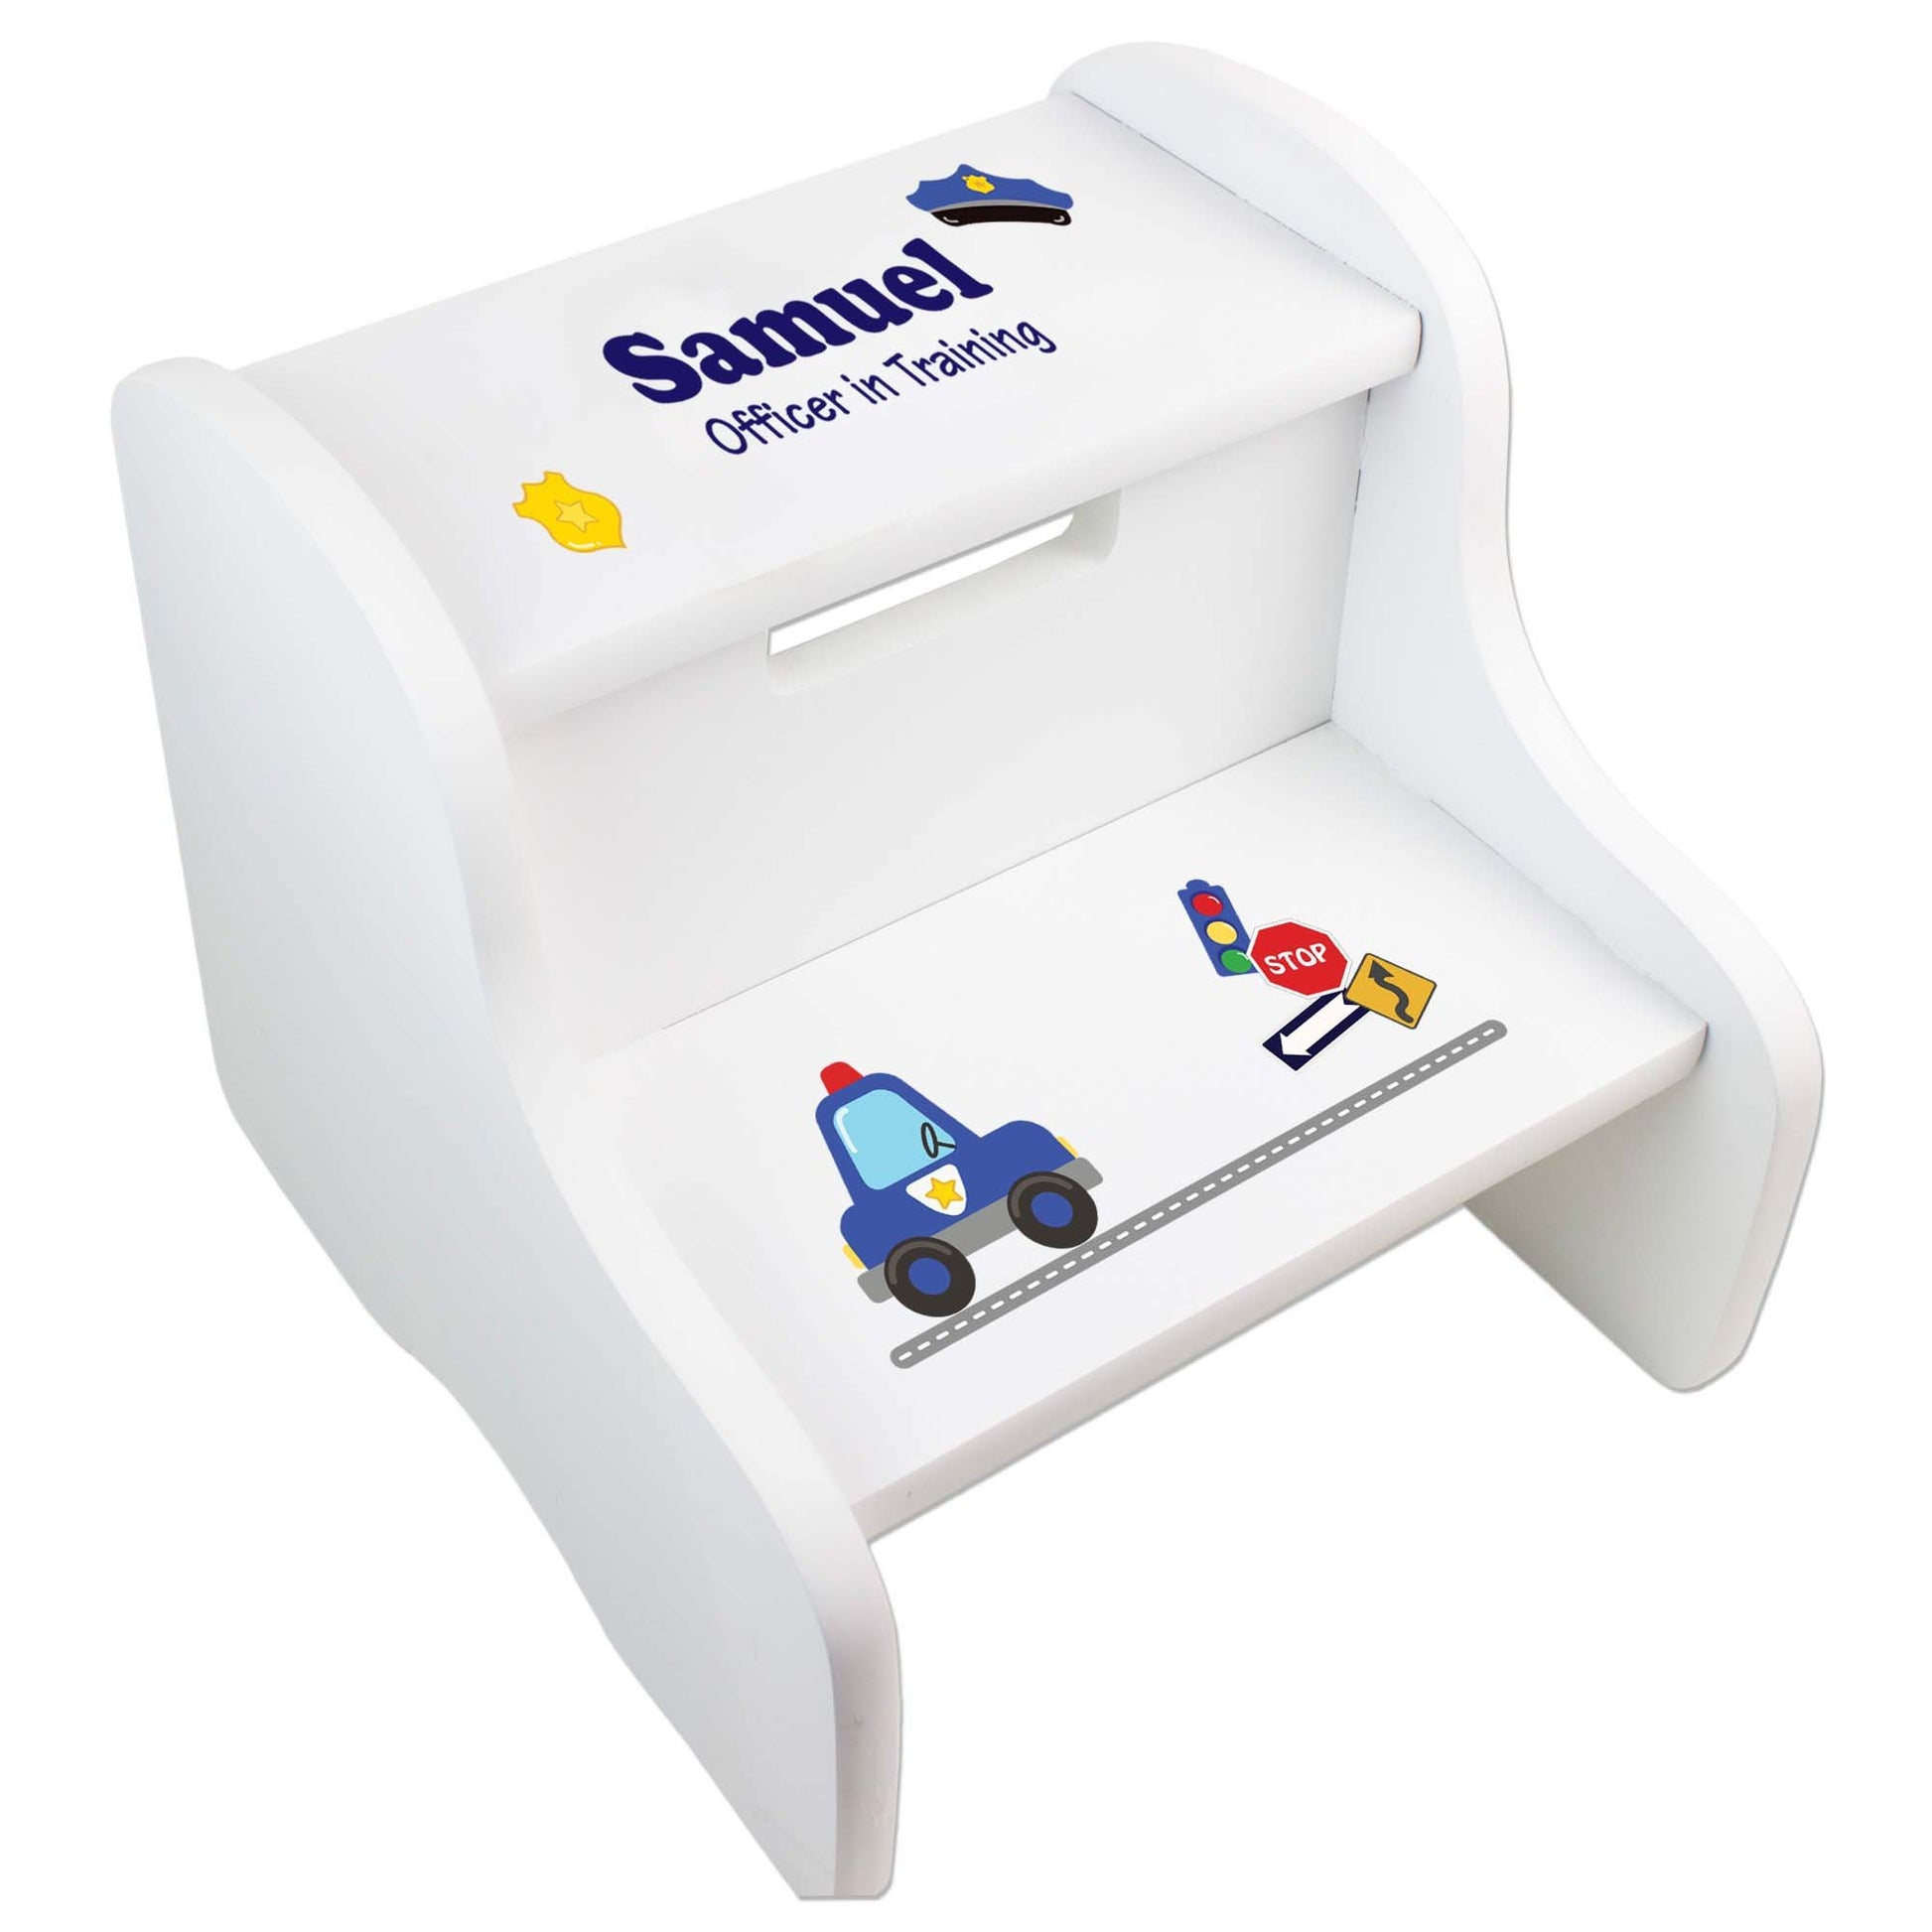 Personalized Boys Construction White Step Stool